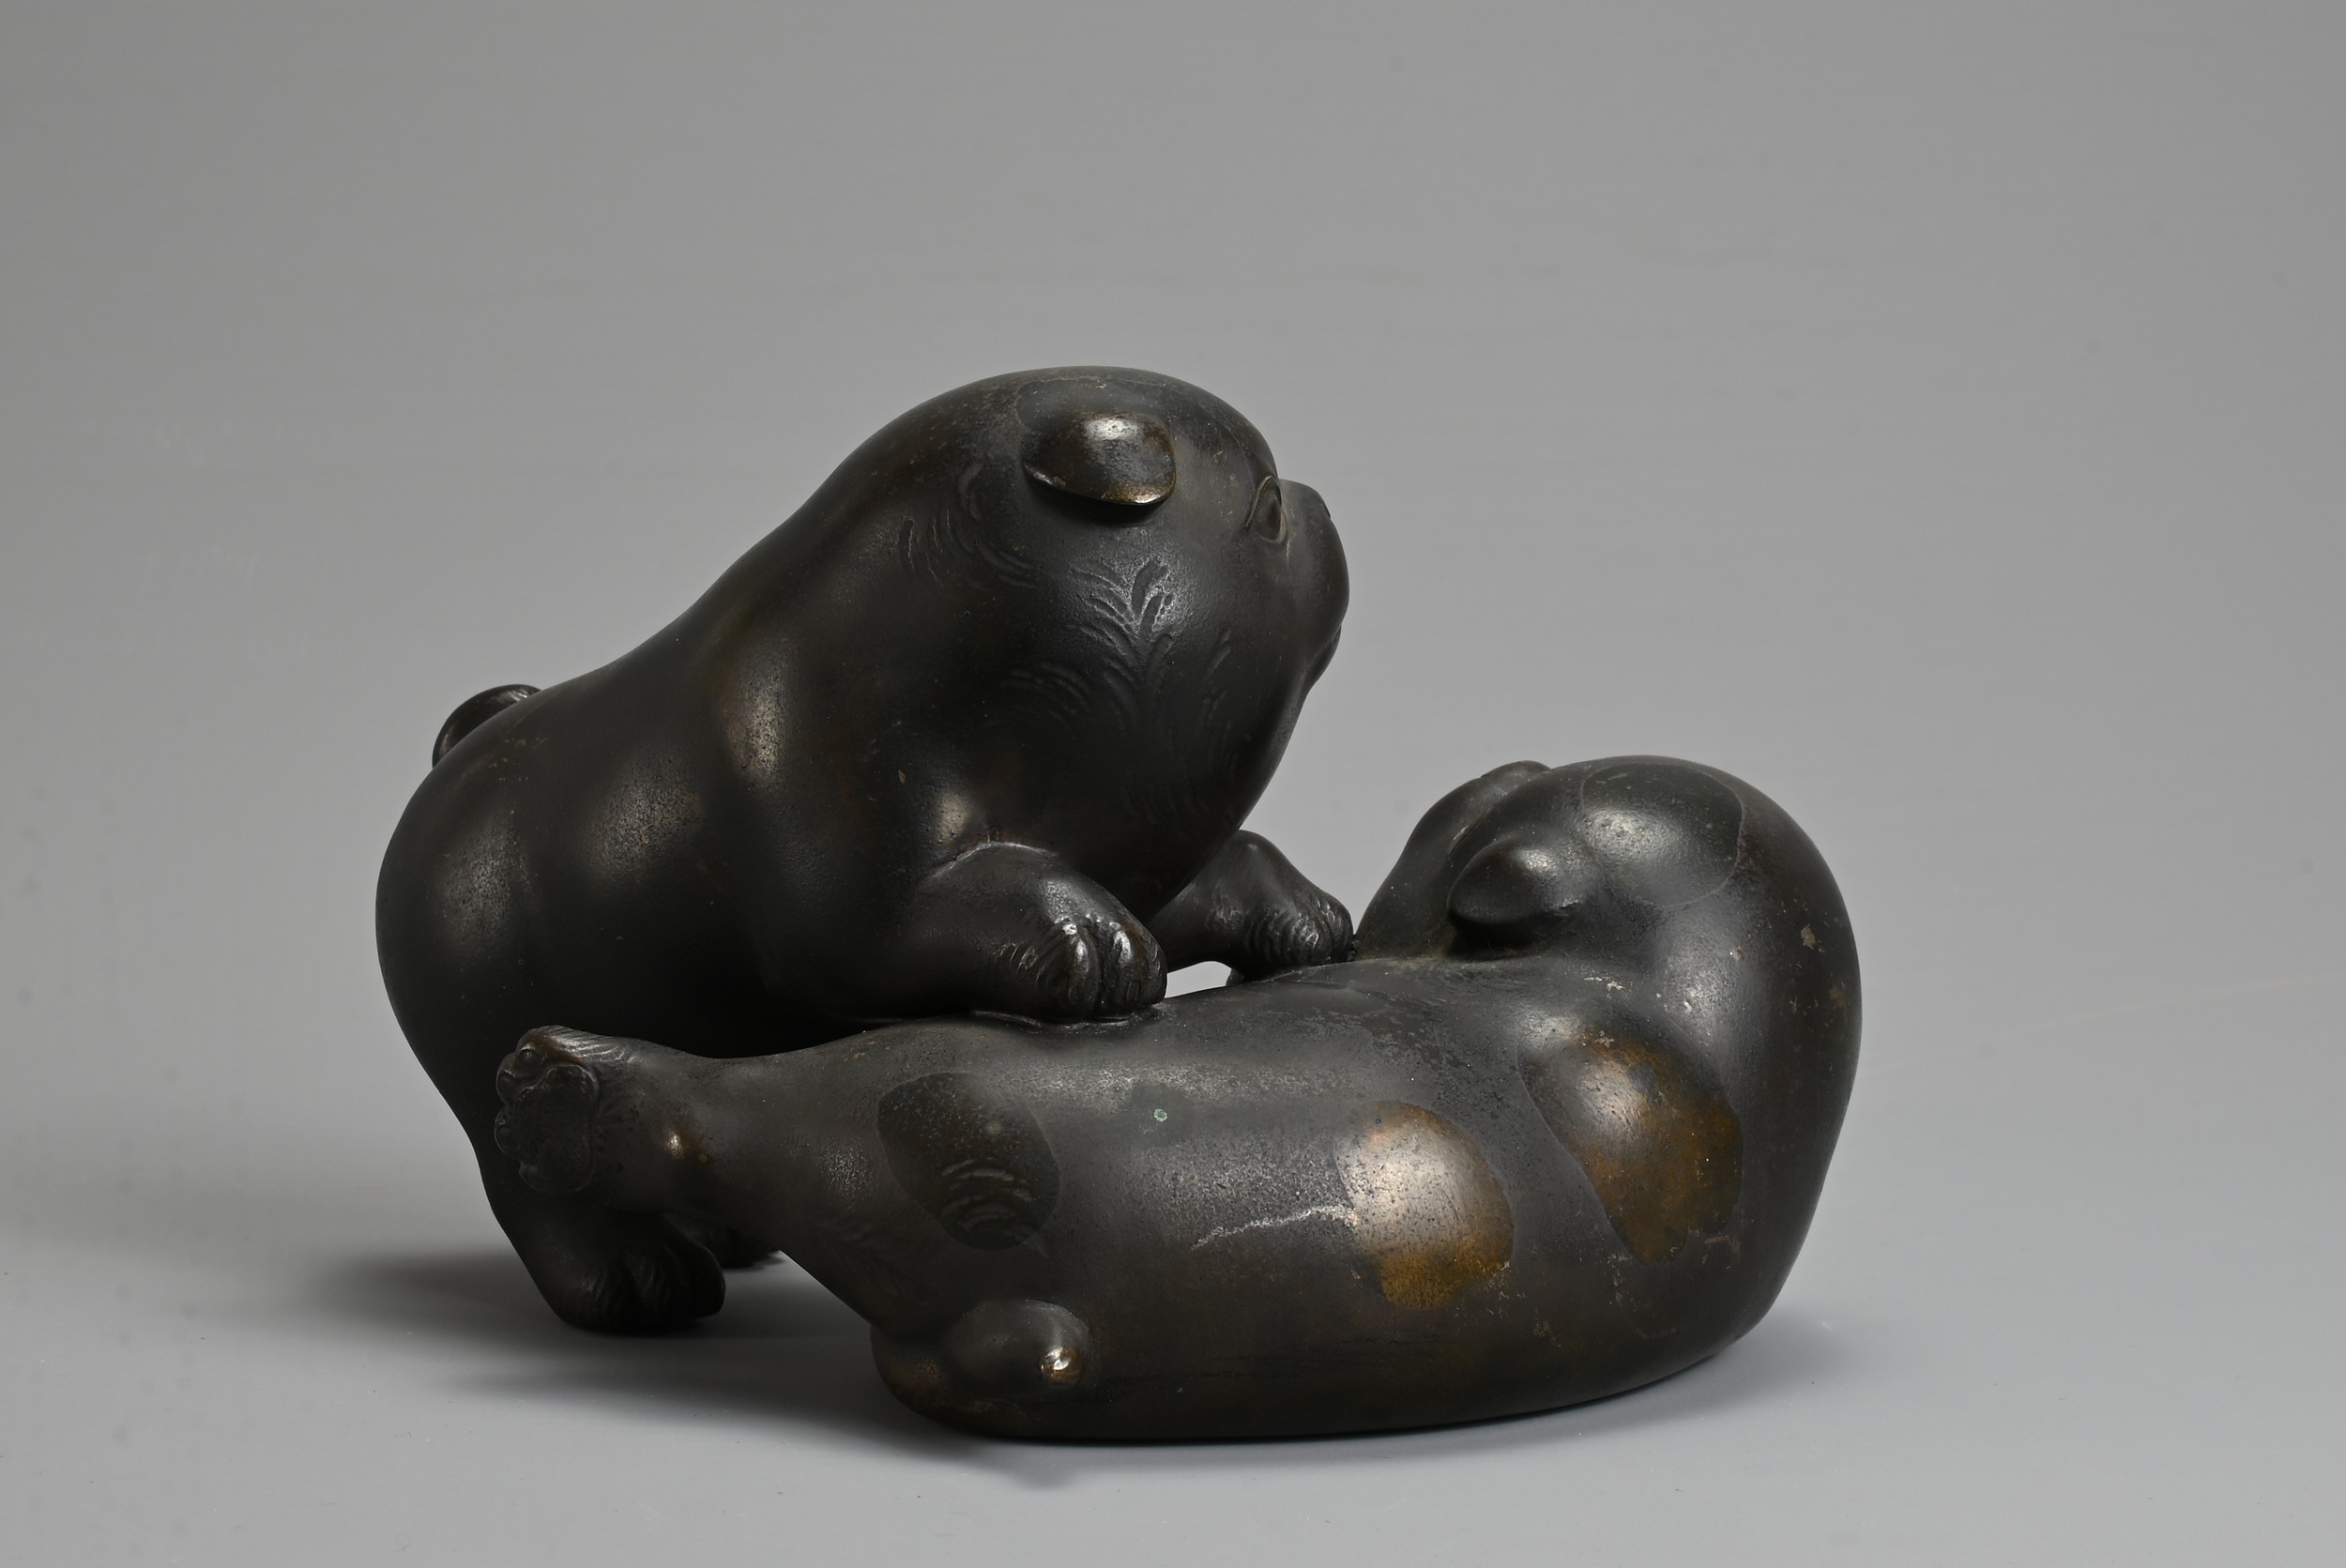 AN EARLY 20TH CENTURY JAPANESE BRONZE OF TWO PUPPIES PLAYING. Signed Tokutani with seal mark to - Image 3 of 7